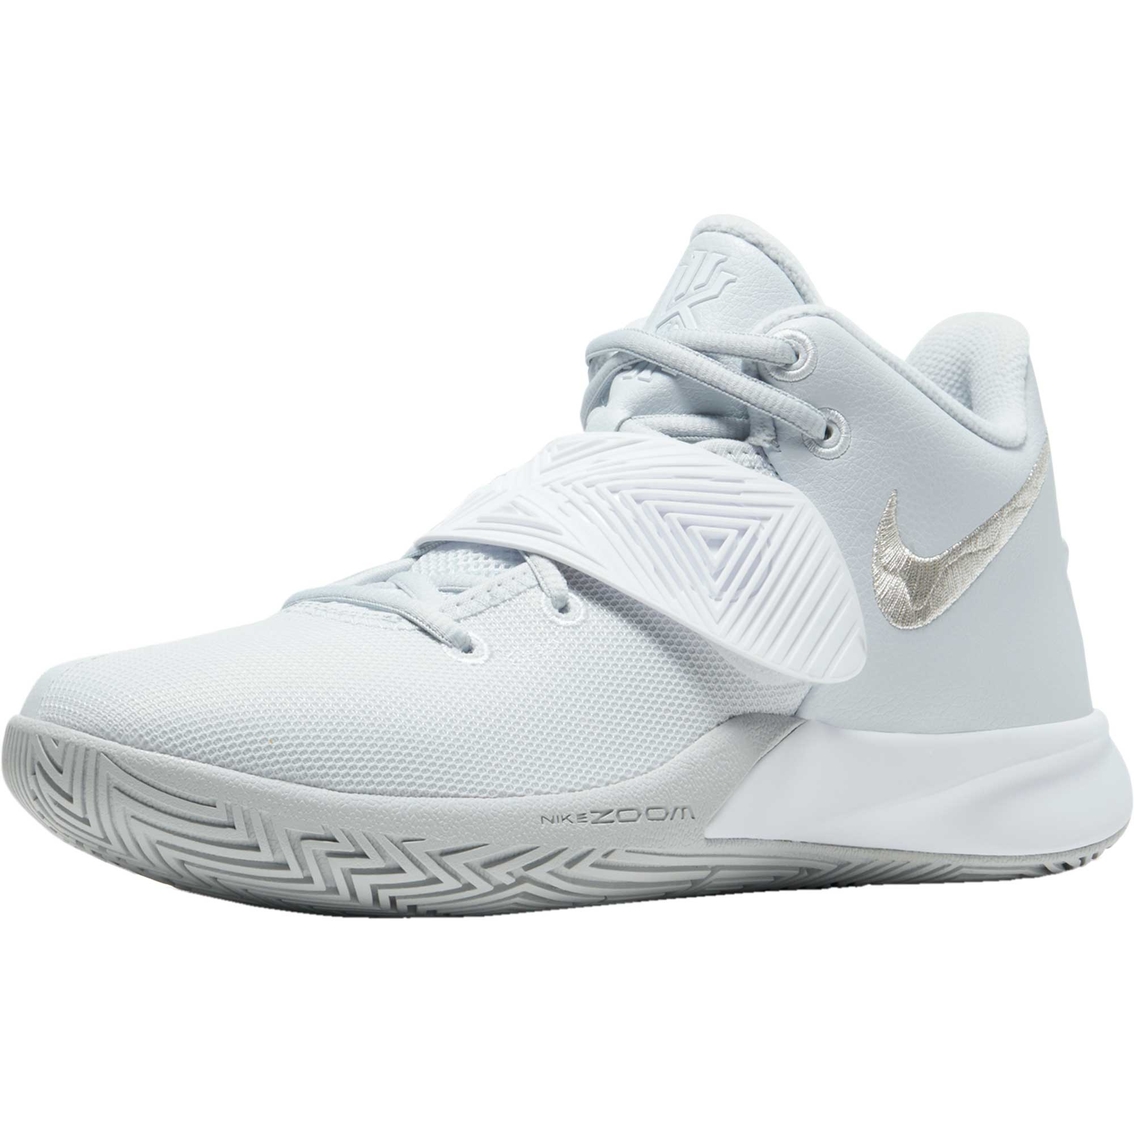 the kyrie shoes